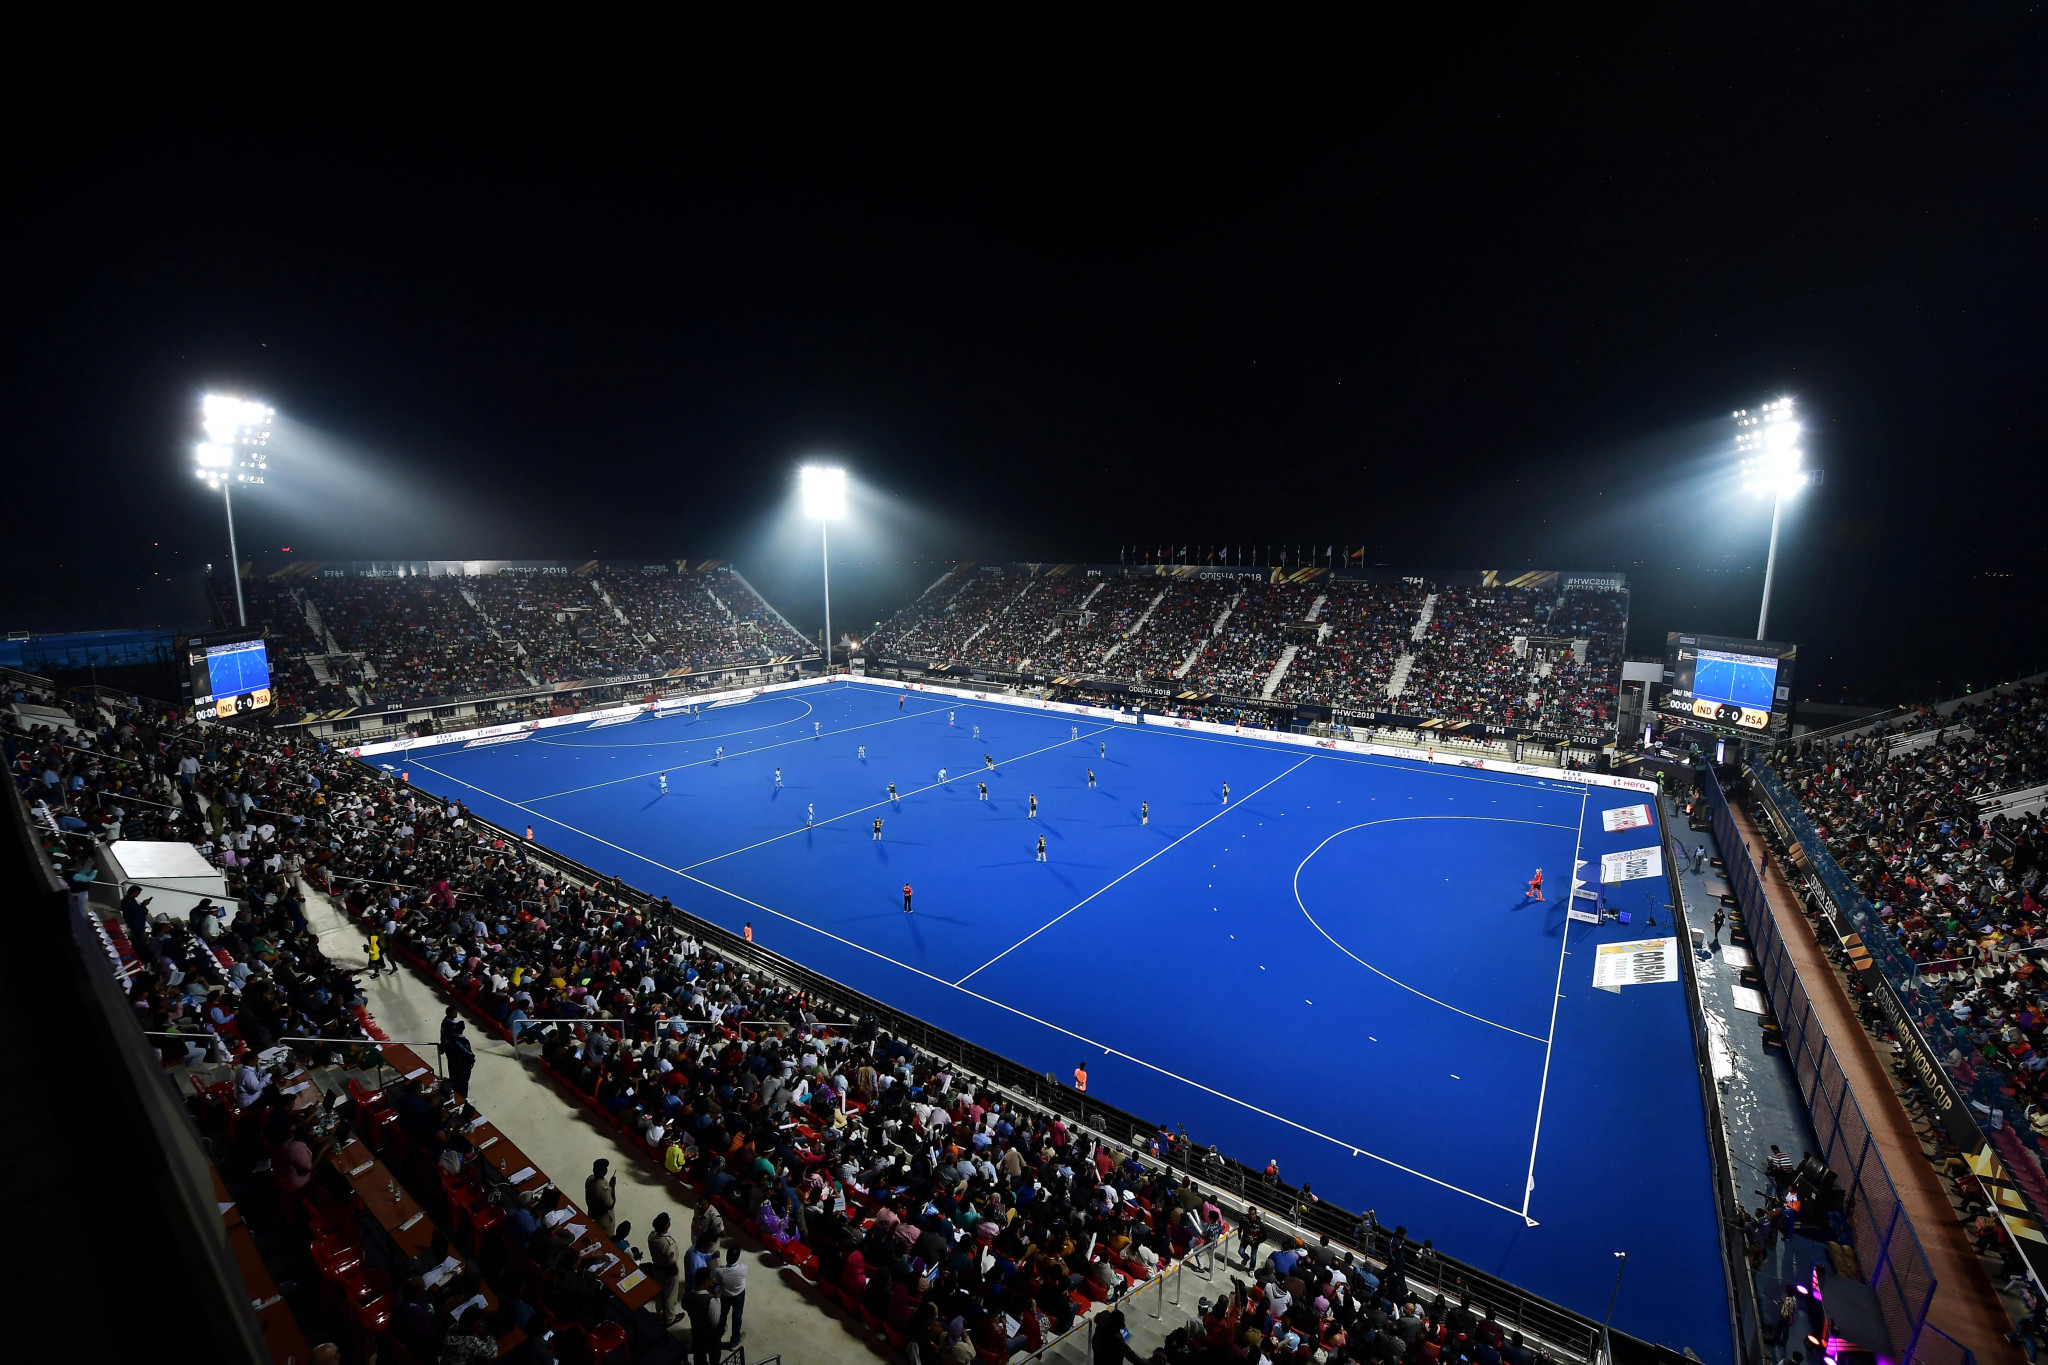 FIH confirm India has guaranteed all countries can enter country for Series Finals event following IOC decision